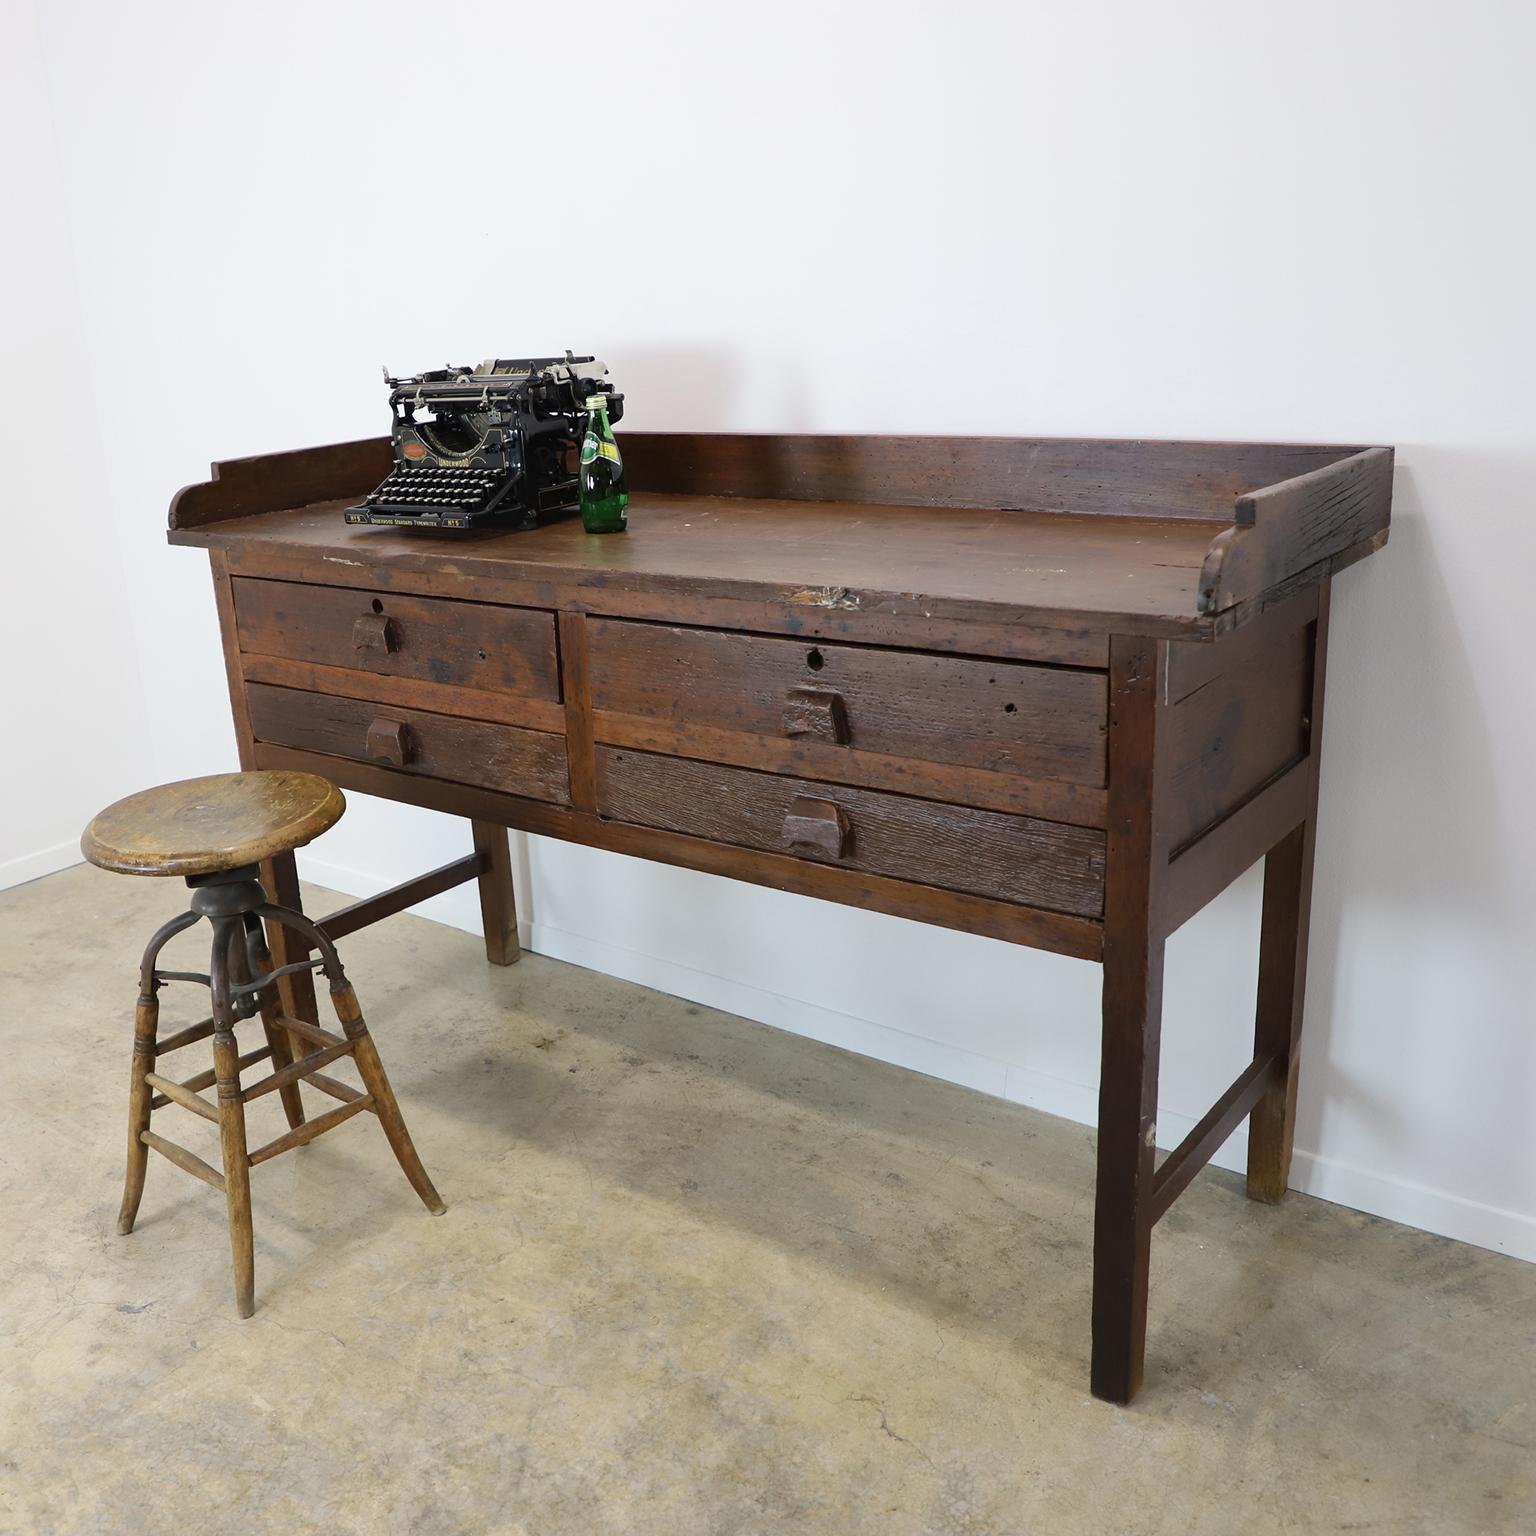 Antique Industrial Jeweler's Bench Work Table In Distressed Condition For Sale In Mexico City, CDMX